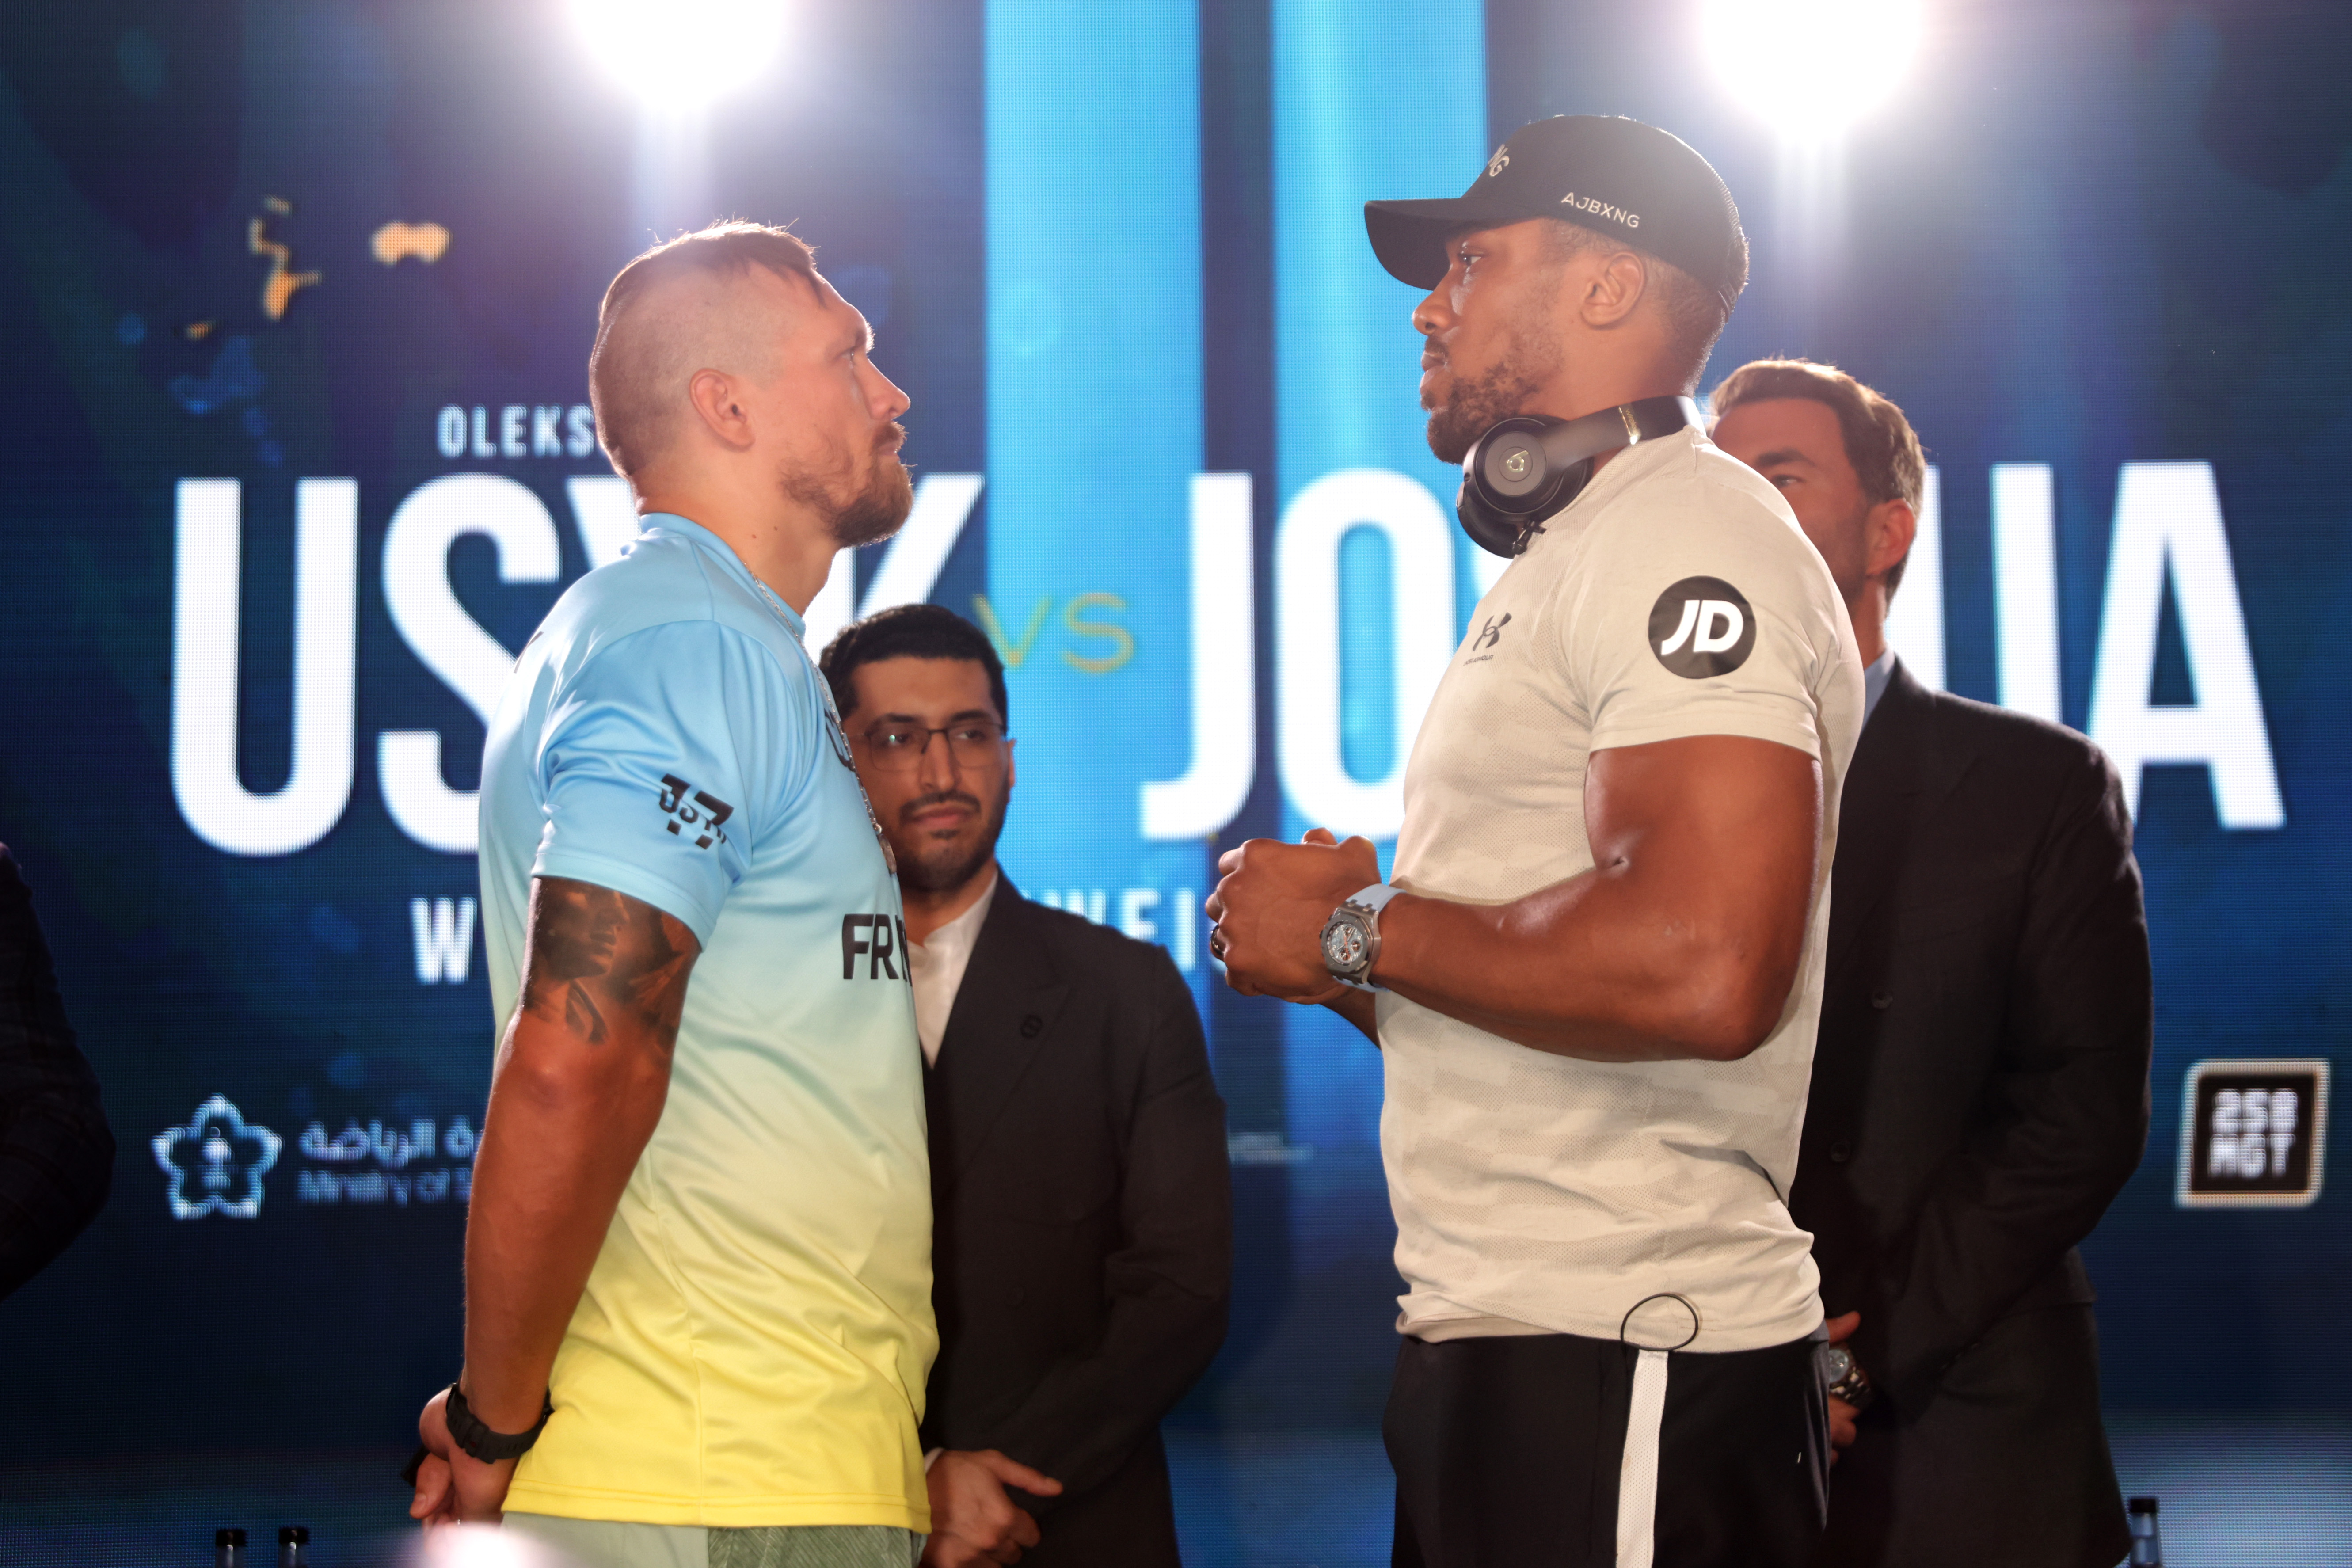 Usyk v Joshua 2 fight week is here! Prophets of Goom preview that fight and more this week